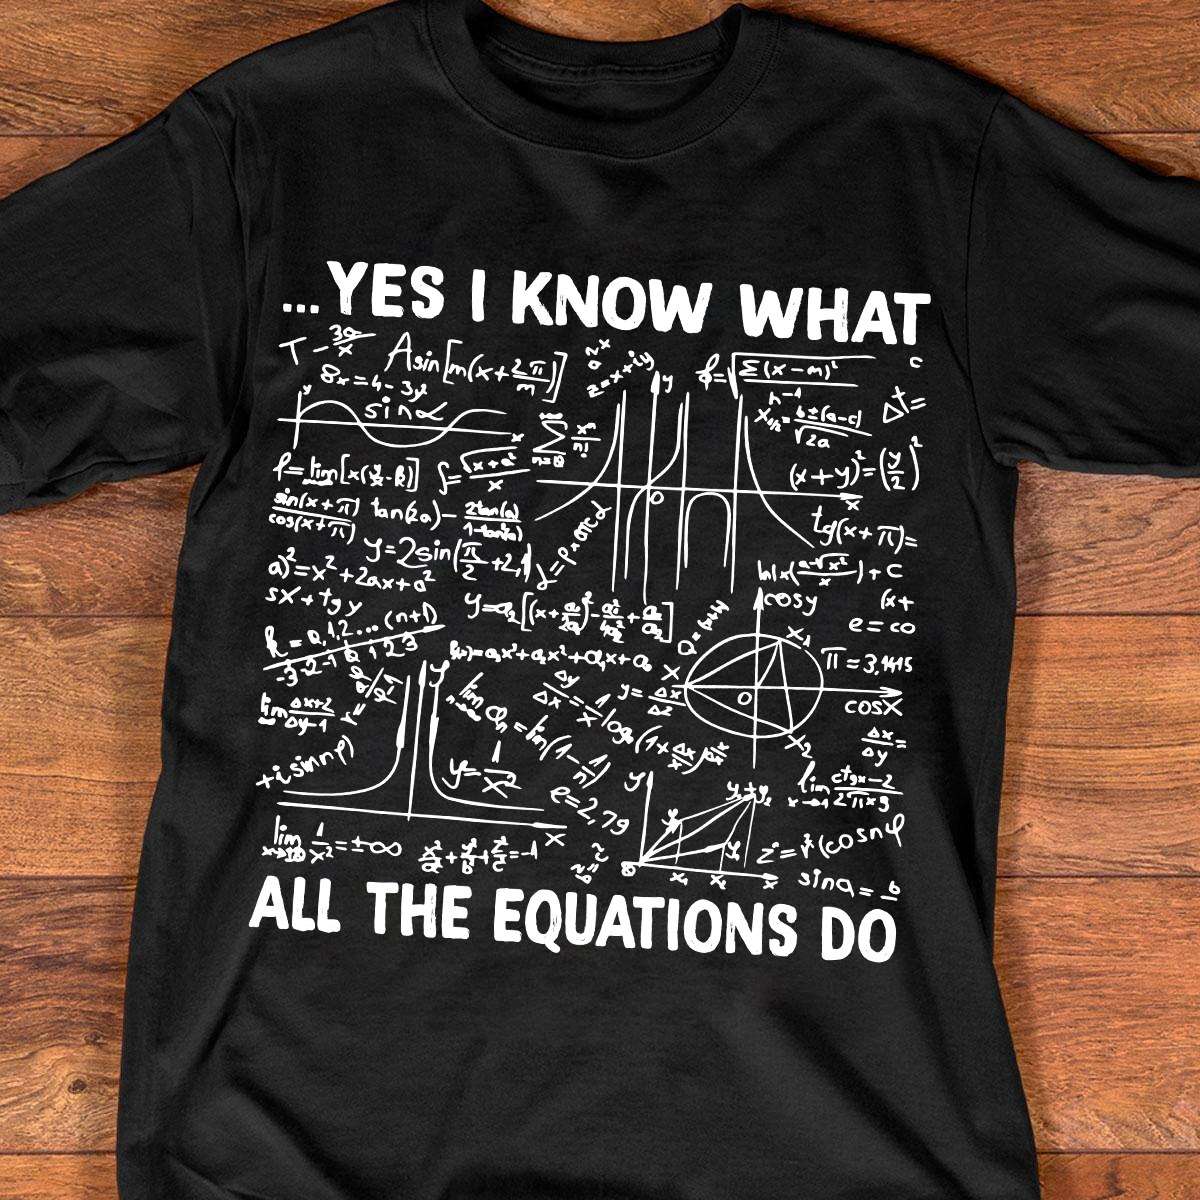 Yes I know what all the equations do - Math equations, Math knowledge shirt